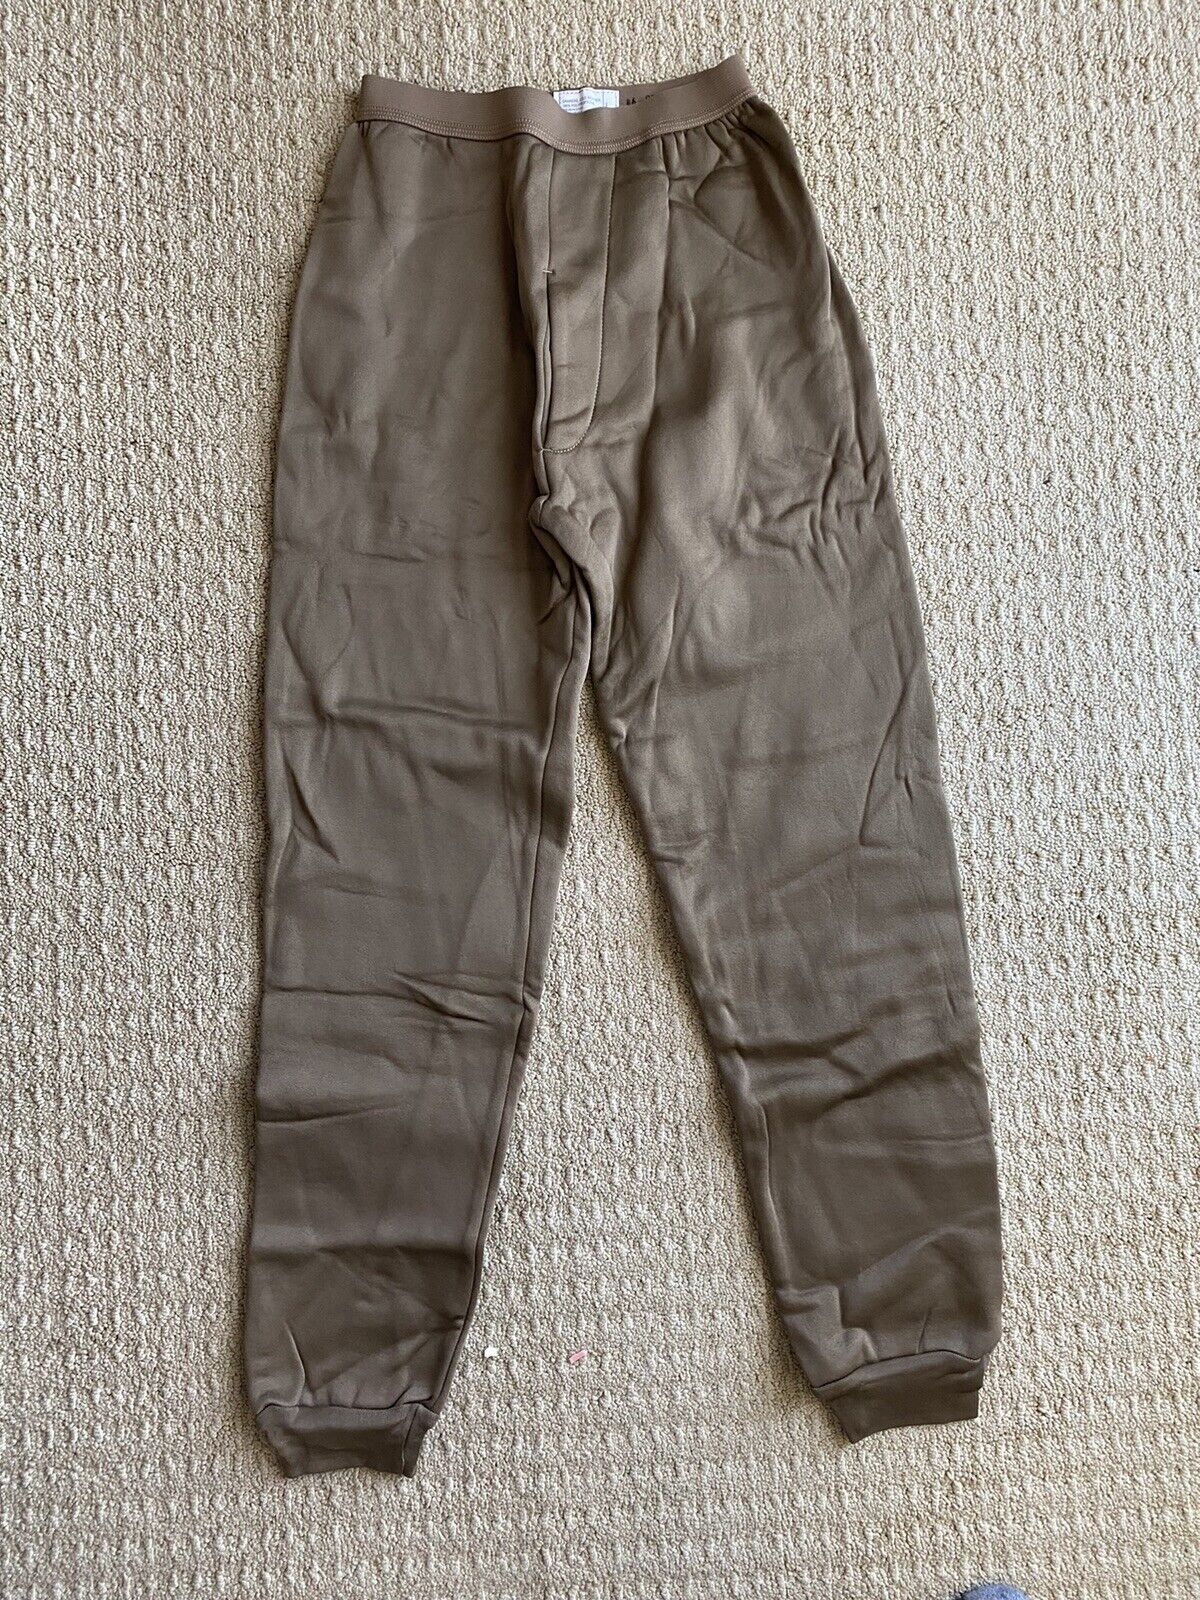 USGI Polypro Cold Weather Drawers Pants ECWCS Thermal Army Small NIW